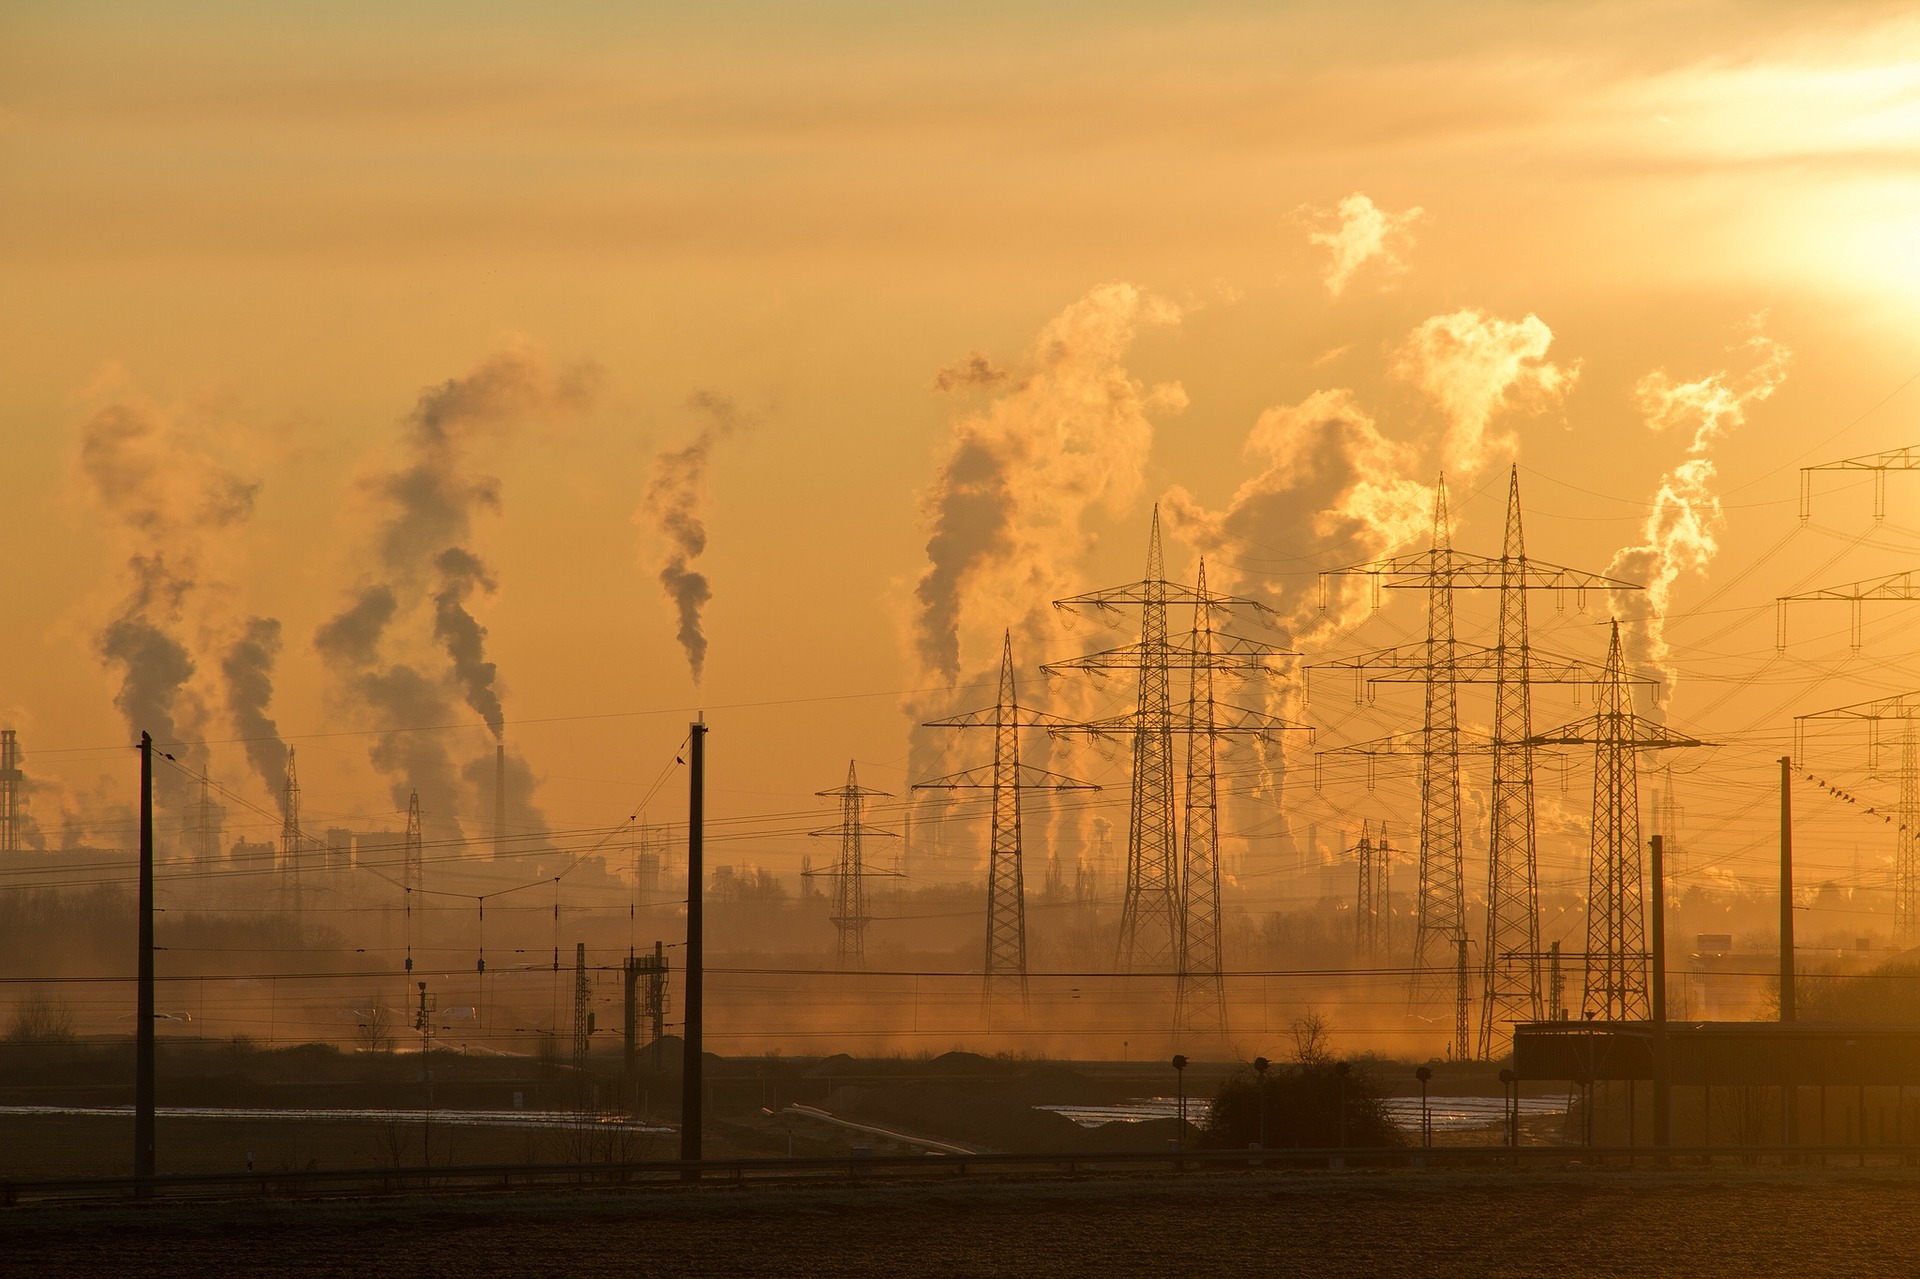 New research links air pollution to increased risk of depression and bipolar disorder